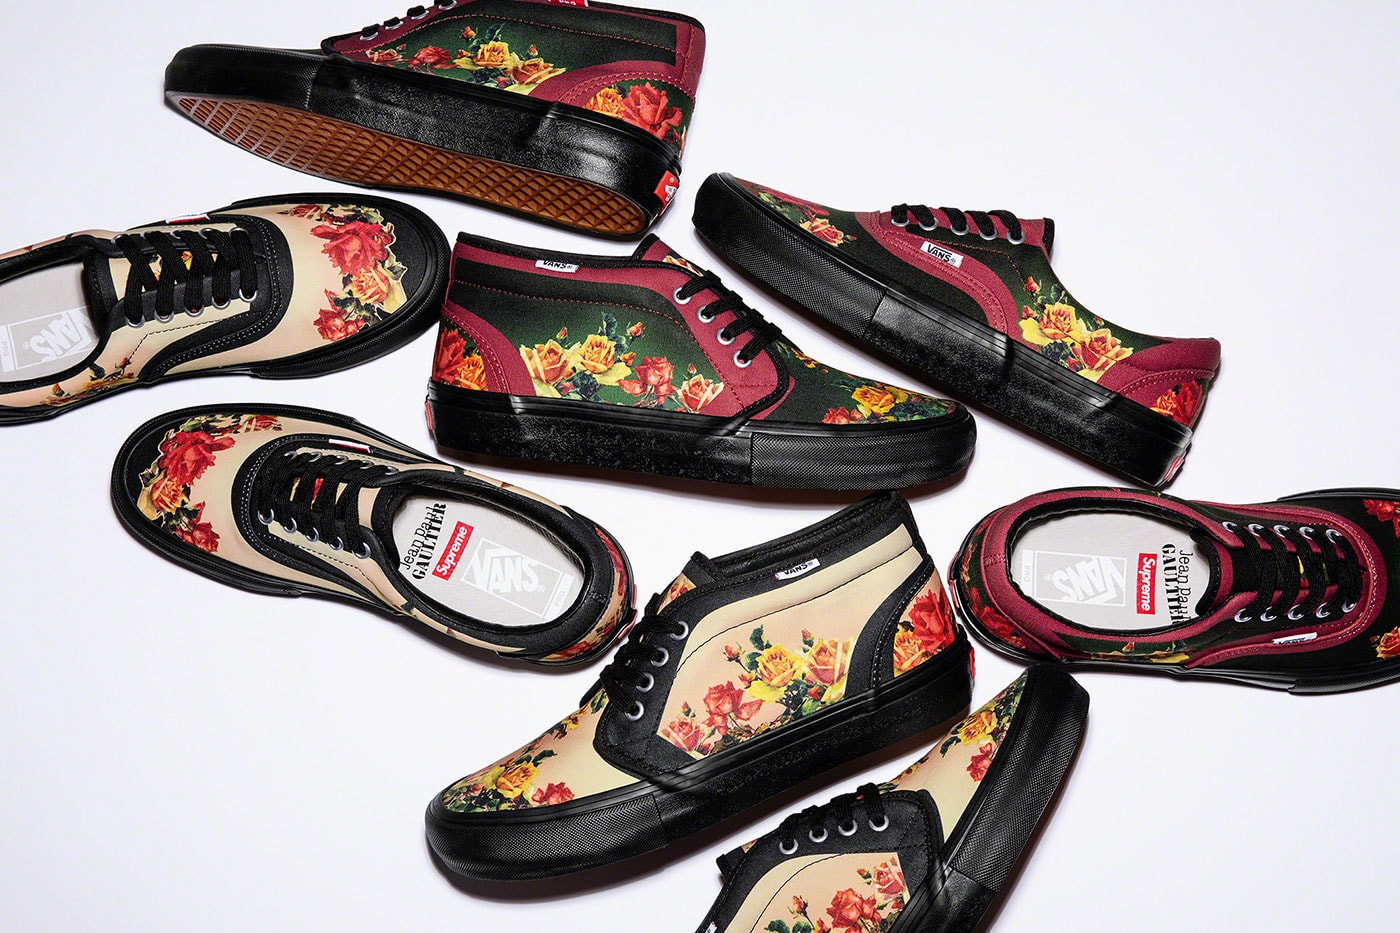 Jean Paul Gaultier x Supreme Prices Revealed